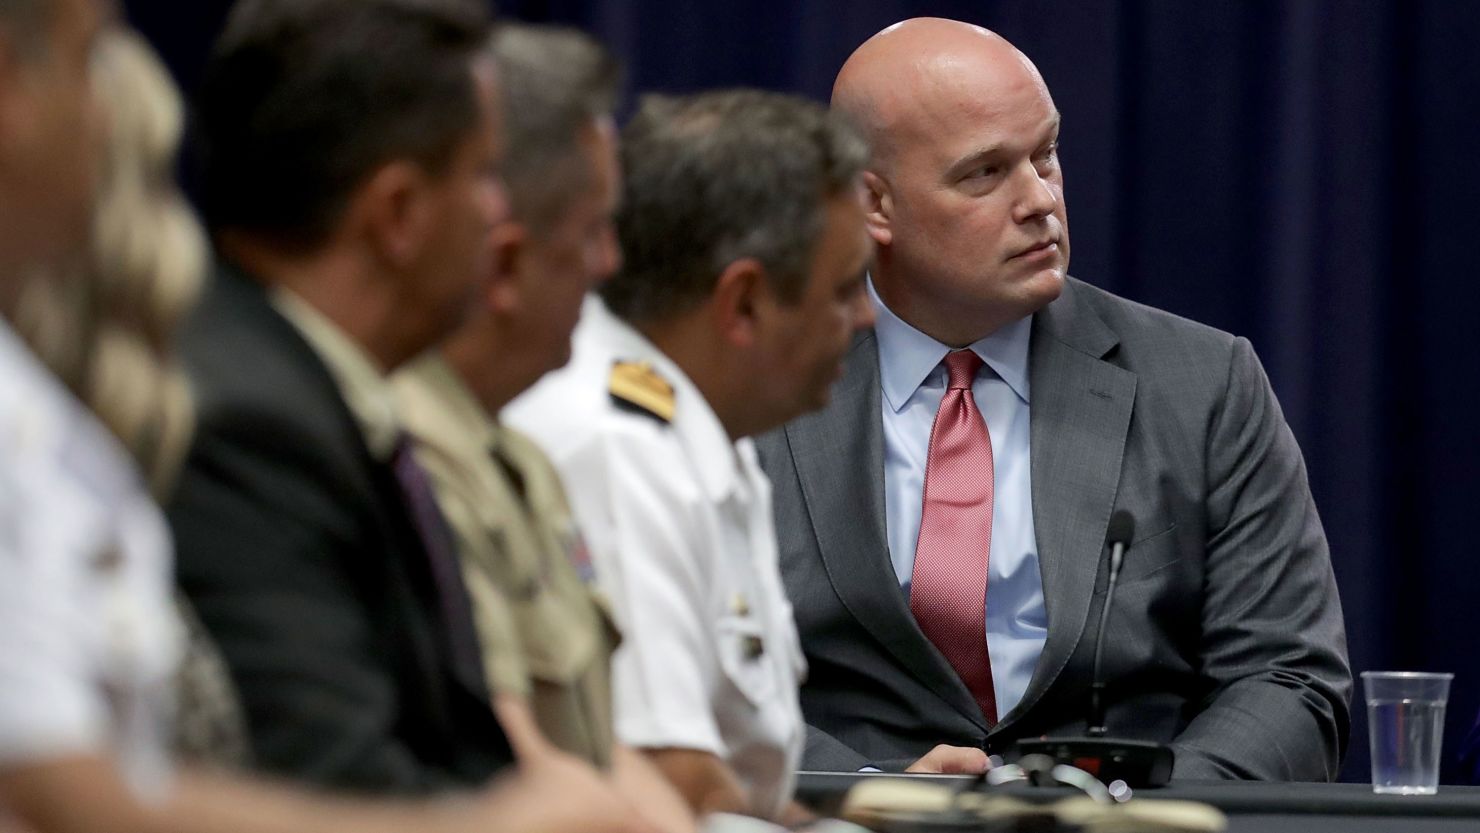 Department of Justice Chief of Staff Matt Whitaker (R) participates in a round table event with the Joint Interagency Task Force - South (JIATF-S) foreign liaison officers at the Department of Justice Kennedy building August 29, 2018 in Washington, DC.  (Photo by Chip Somodevilla/Getty Images)